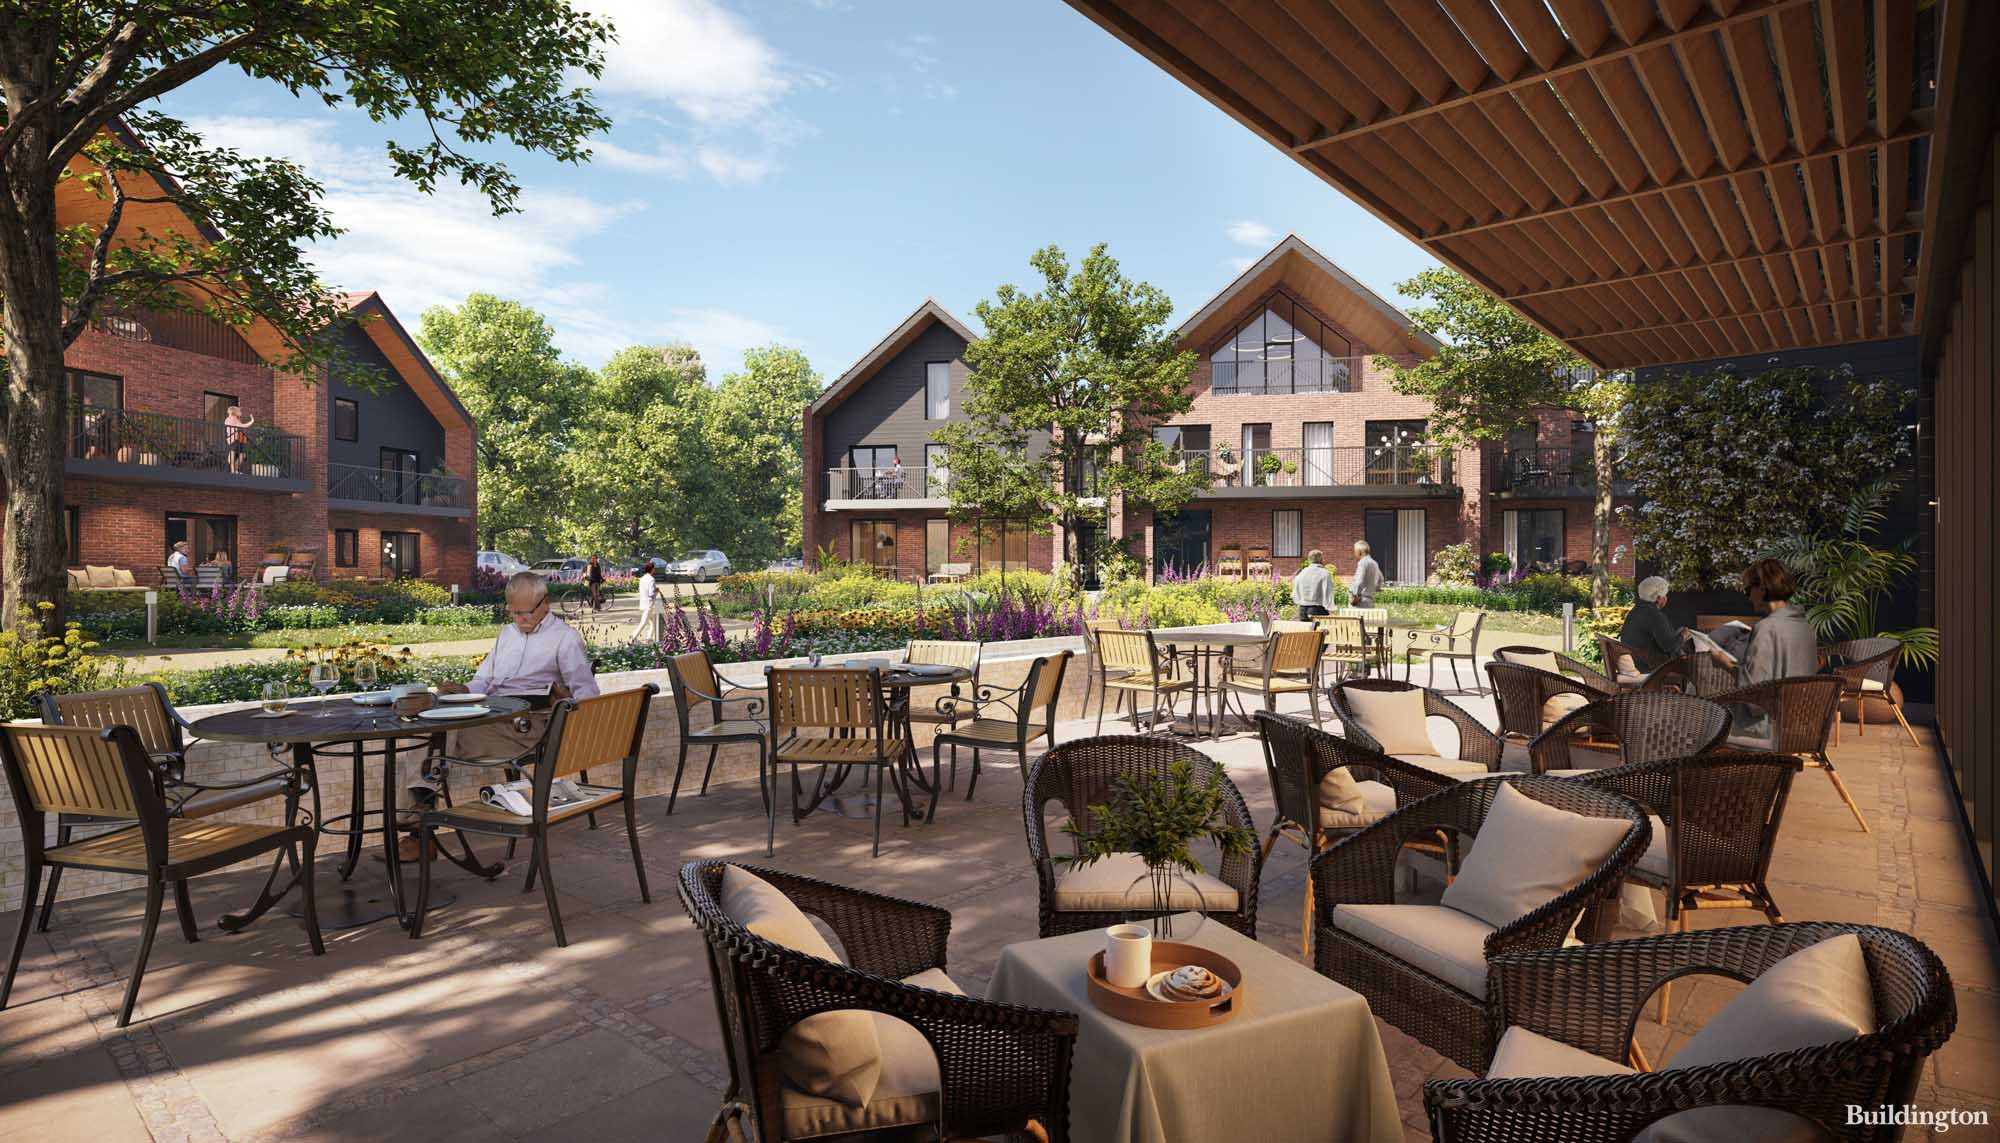 Clubhouse outdoor area in Shiplake Meadows development in Oxfordshire, England.